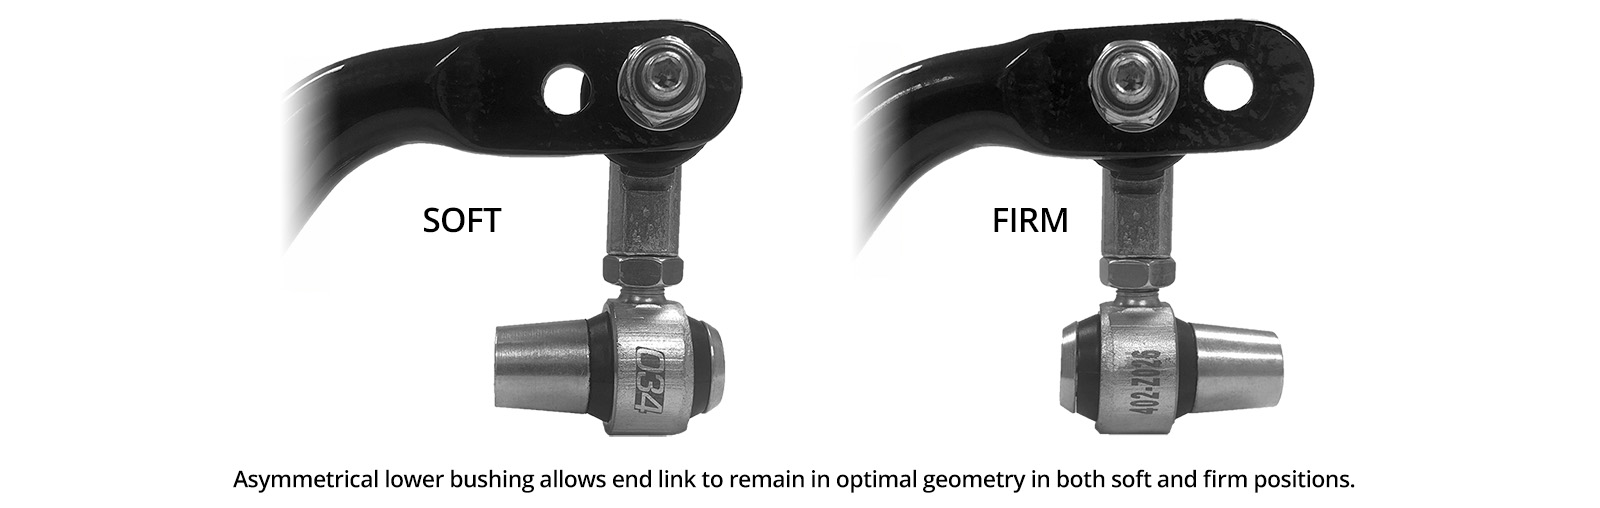 The asymmetrical design of the lower bushing allows the end link to maintain proper vertical geometry in both the soft and firm positions on the sway bar.